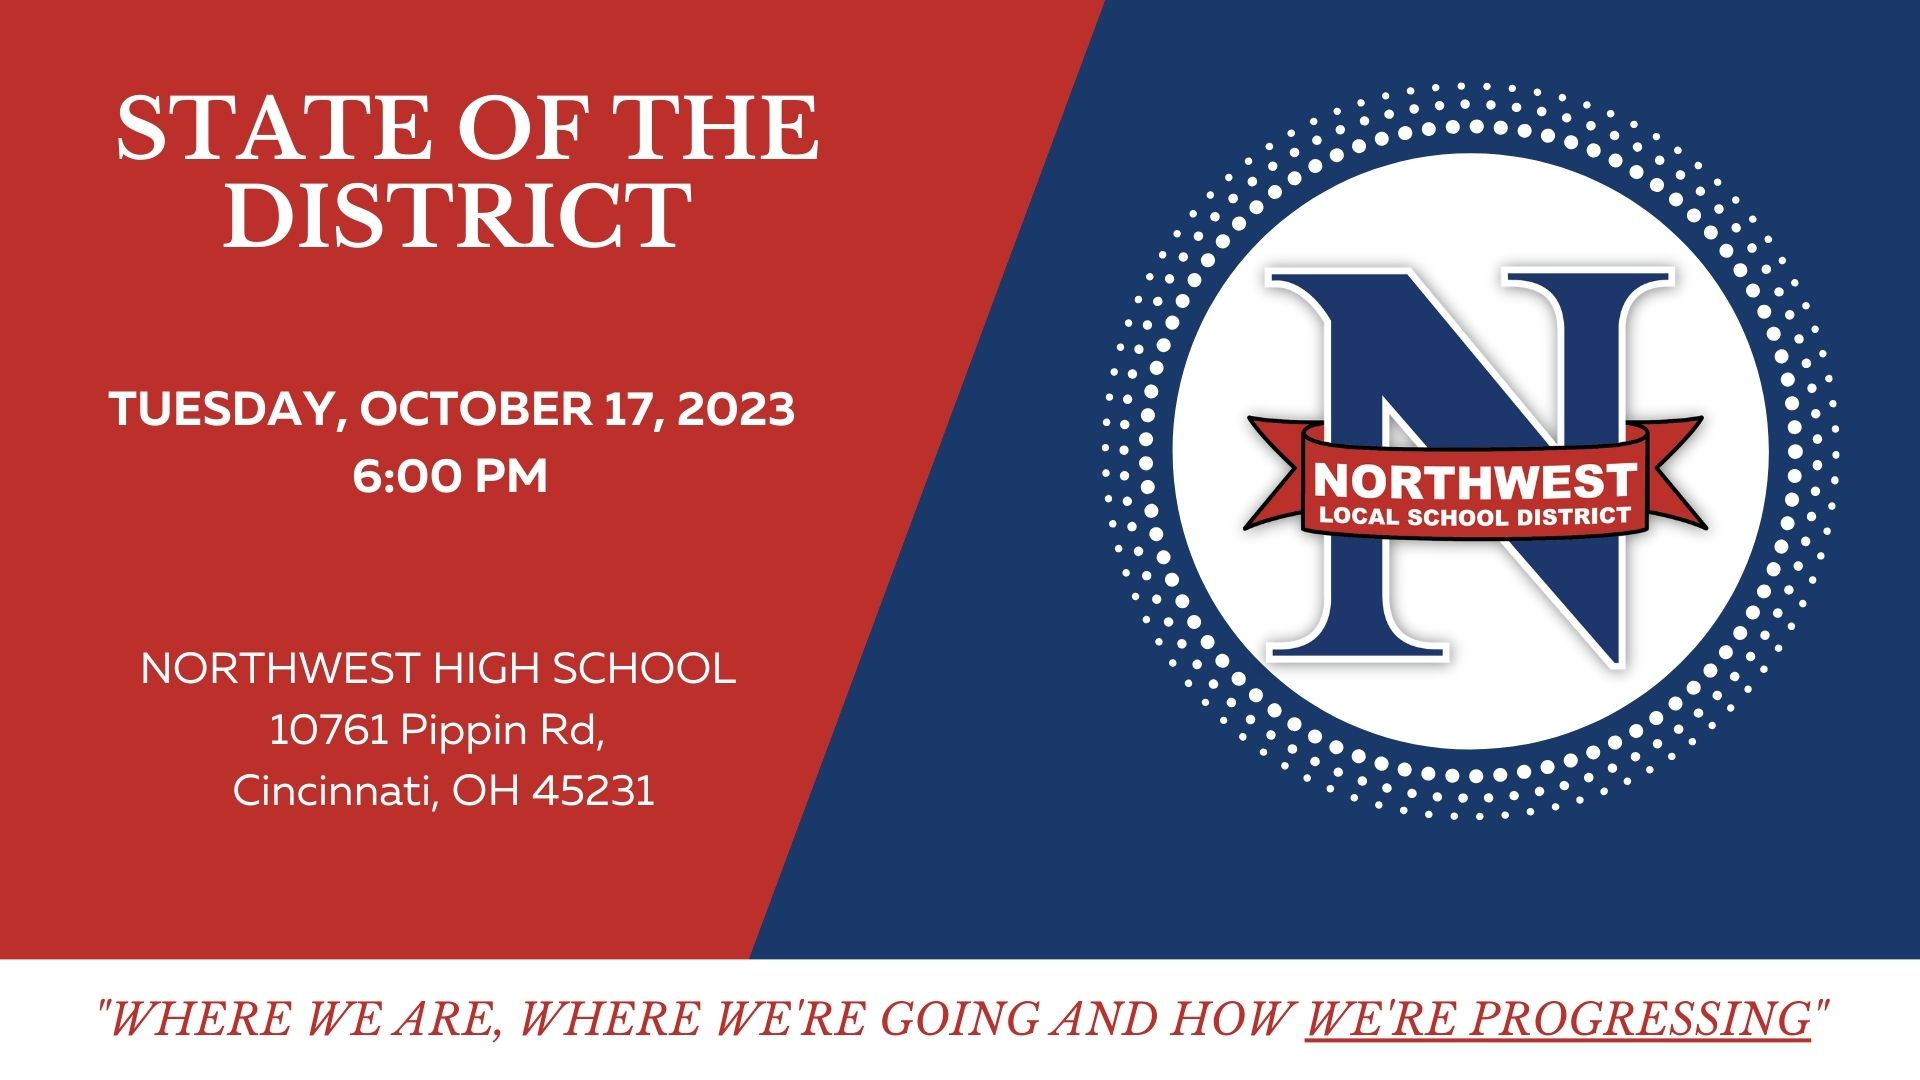 State of the District, Northwest Local School District, Tuesday, October 17, 2023 6:00 PM     Northwest High School 10761 Pippin Rd Cincinnati, OH 45231 "Where we are, where we're going and how we're progressing"